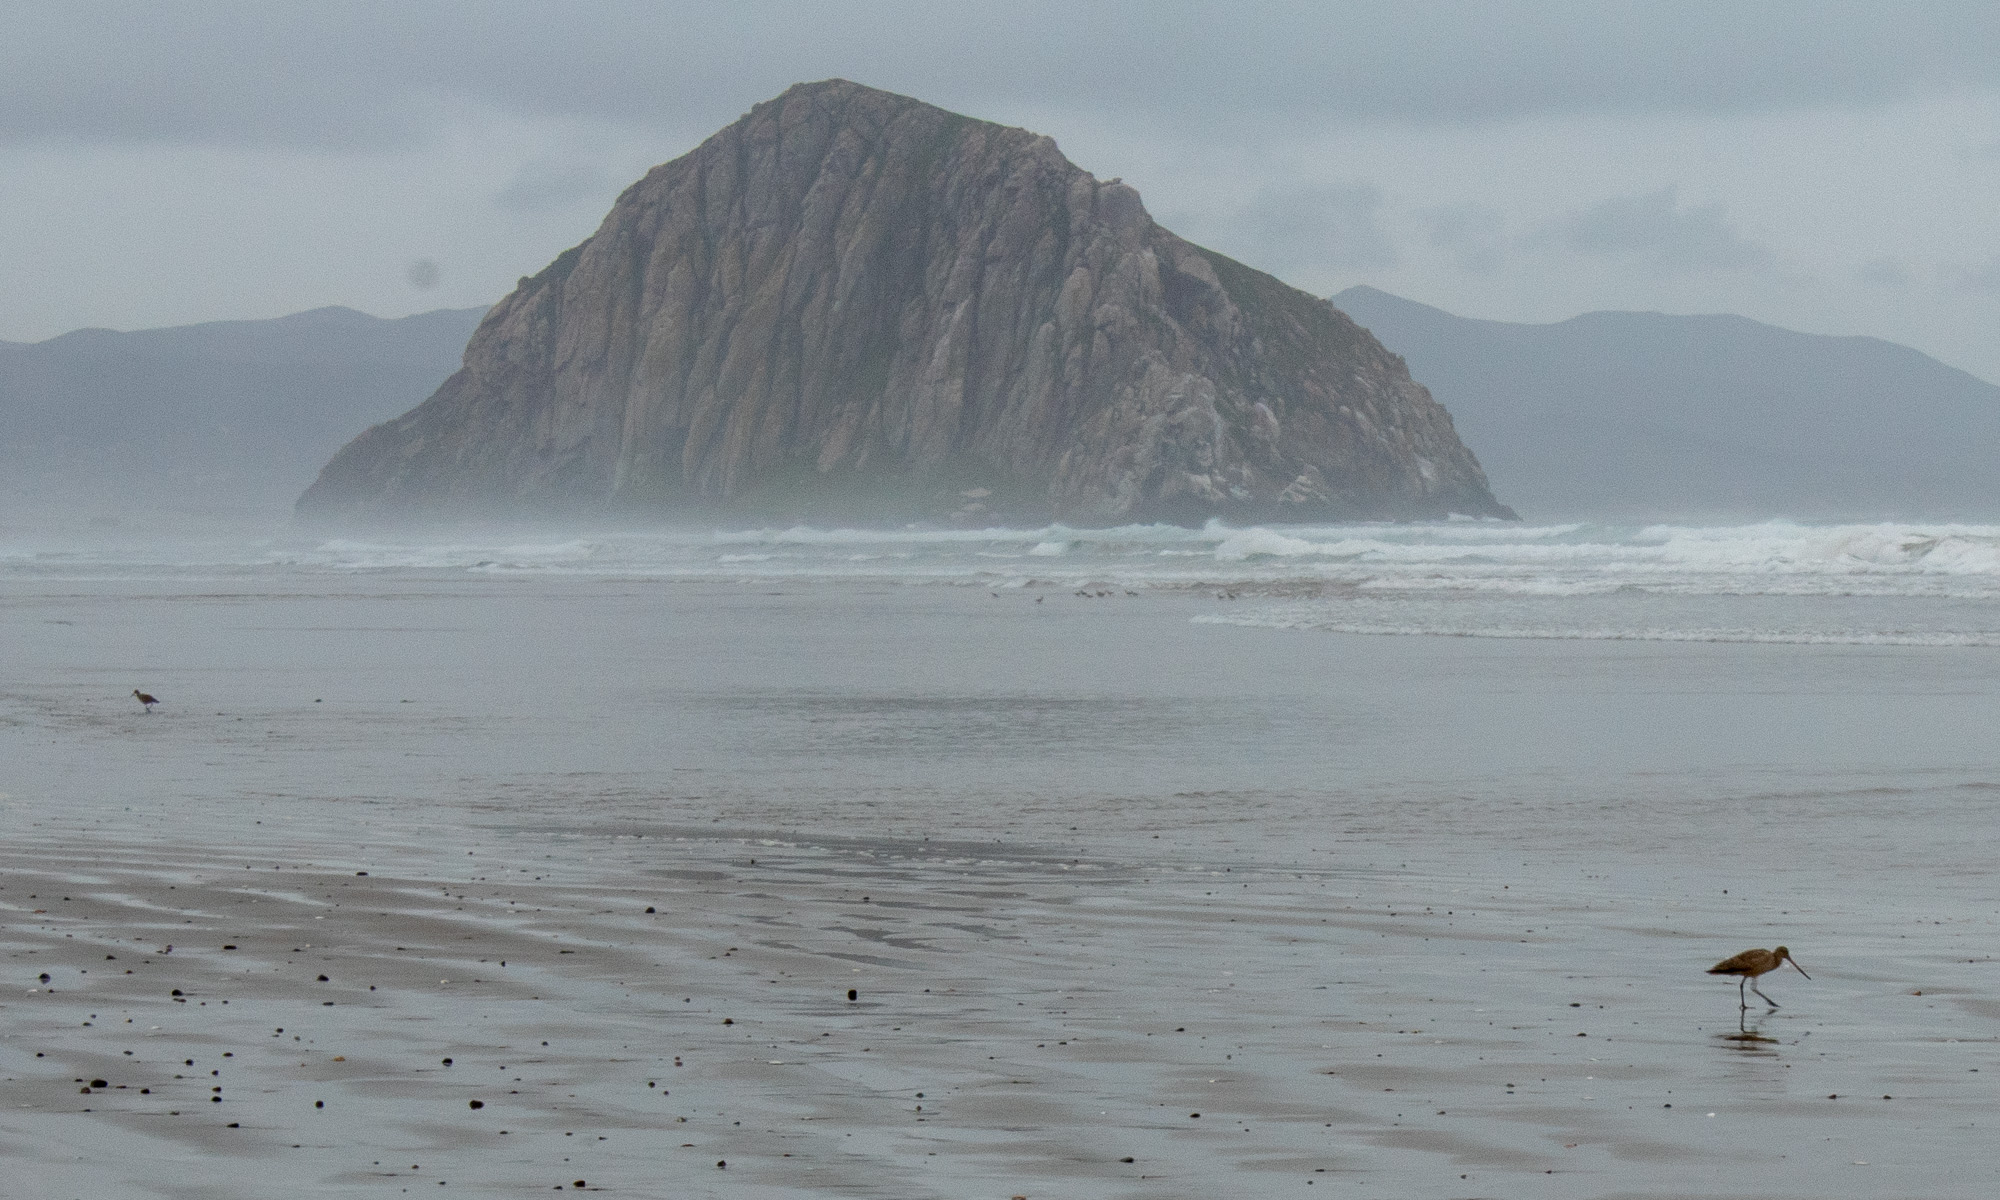 Morro Rock in the distance on a gold, wet, cloudy day at Morro Bay Beach in California